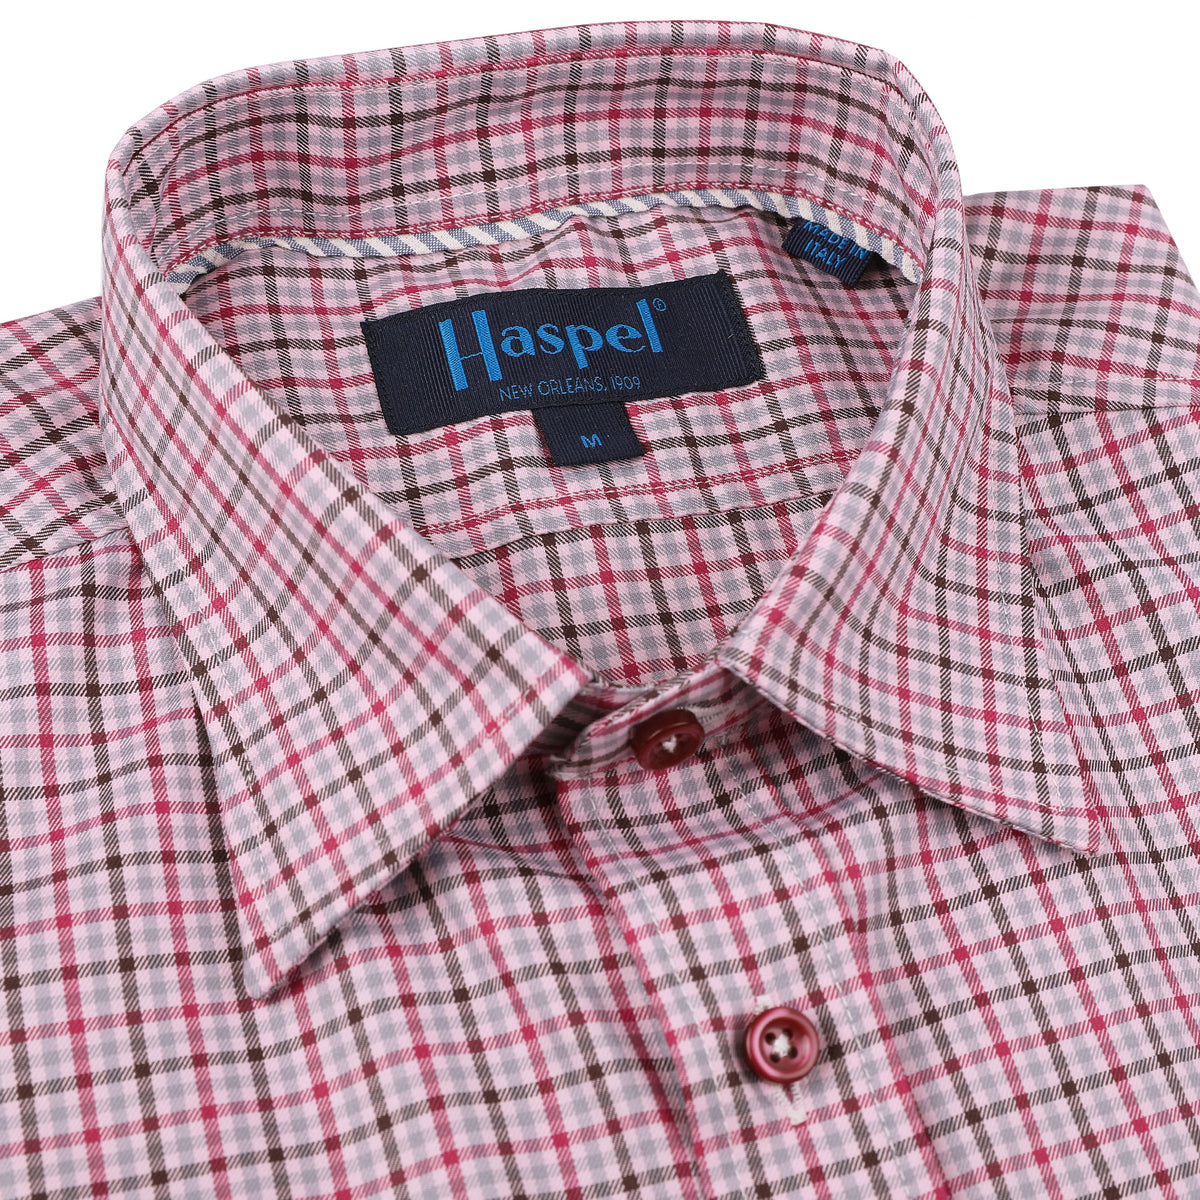 Treme&#39;s Rose Plaid shirt is perfect for adding a subtle hint of color to your outfit. Constructed of soft and breathable fabric, this classic shirt features a rose plaid design with rosy buttons, perfect for the fashionable dresser.  100% Cotton • Hidden Button Collar • Long Sleeve • Chest Pocket • Machine Washable • Made in Italy • Return Policy